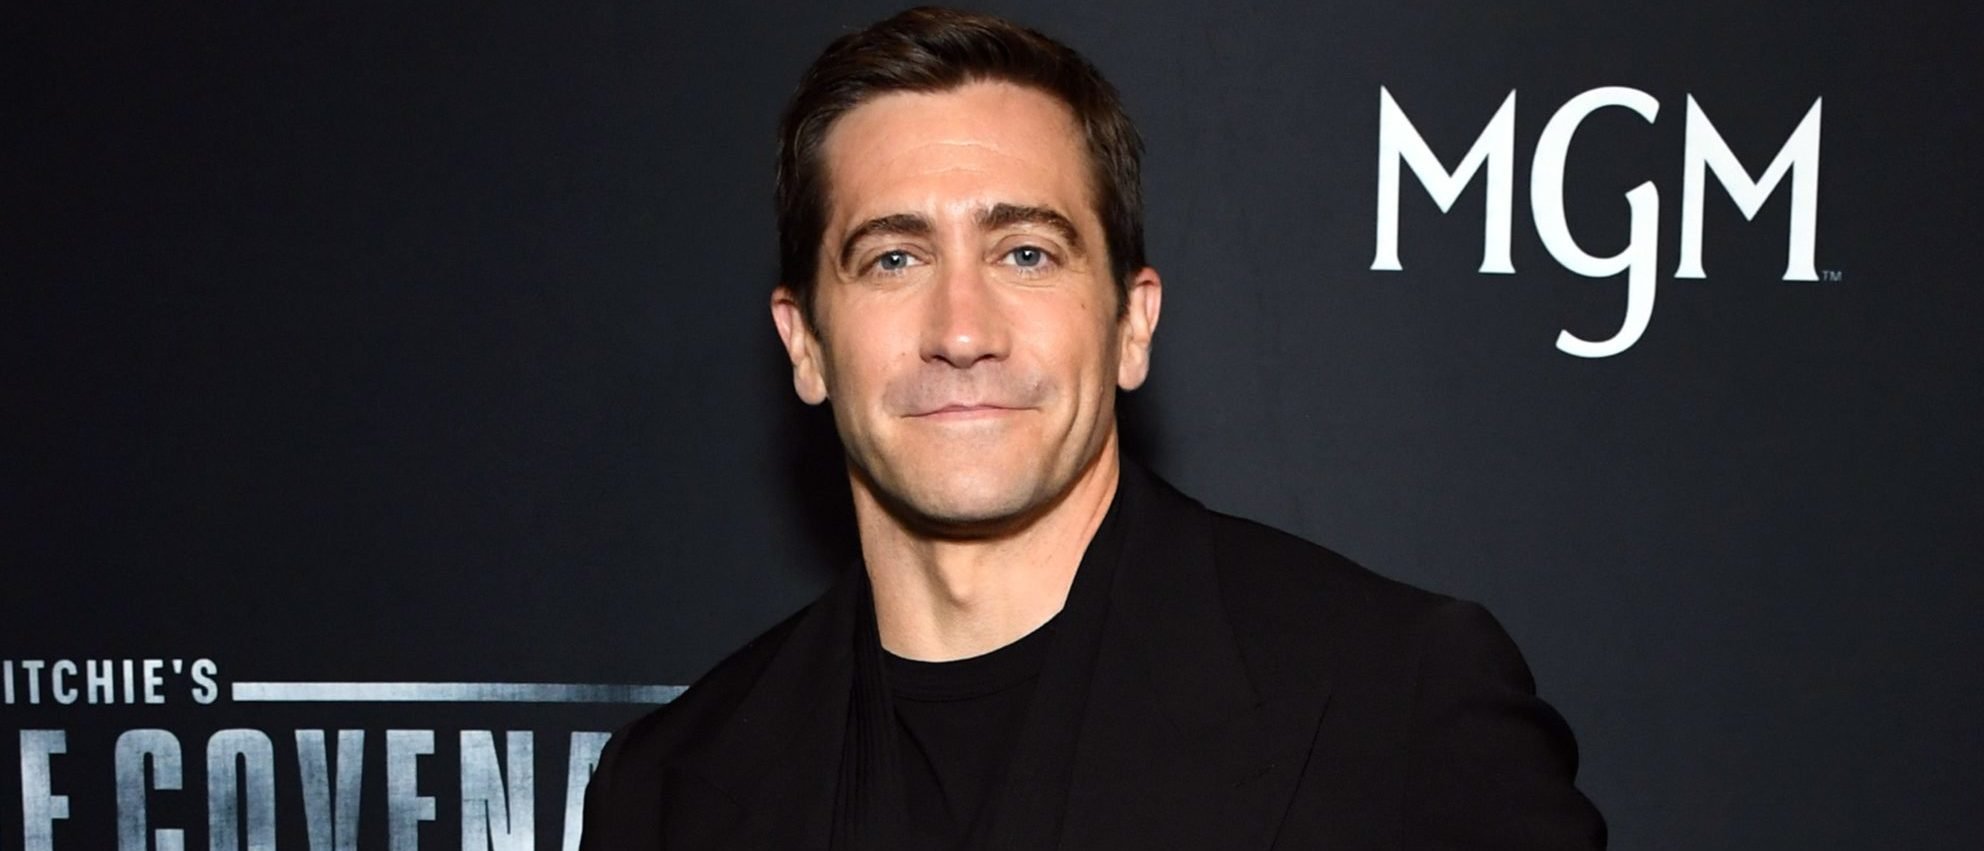 Legal Battle Ensues Over Jake Gyllenhaal’s ‘Road House’ After Amazon Studios Hit With Lawsuit